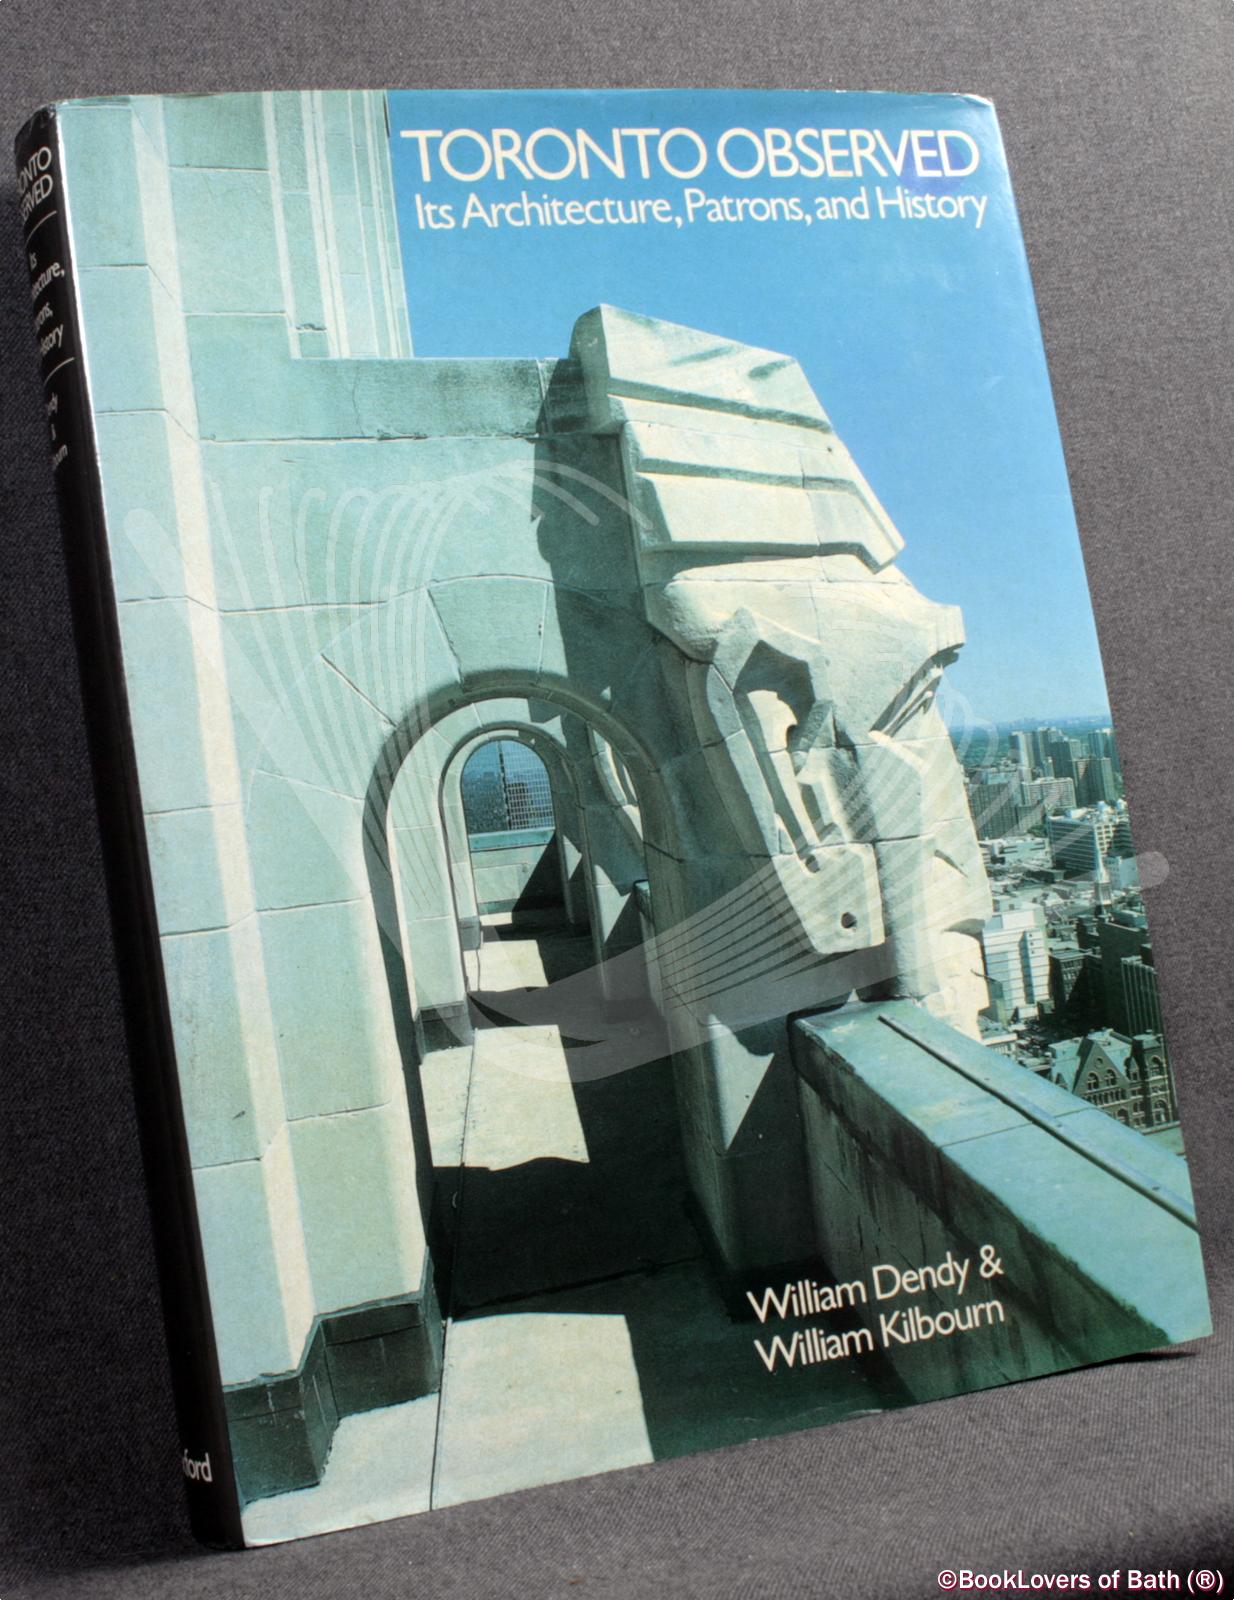 Toronto Observed: Its Architecture, Patrons, and History - William Dendy & William Kilbourn